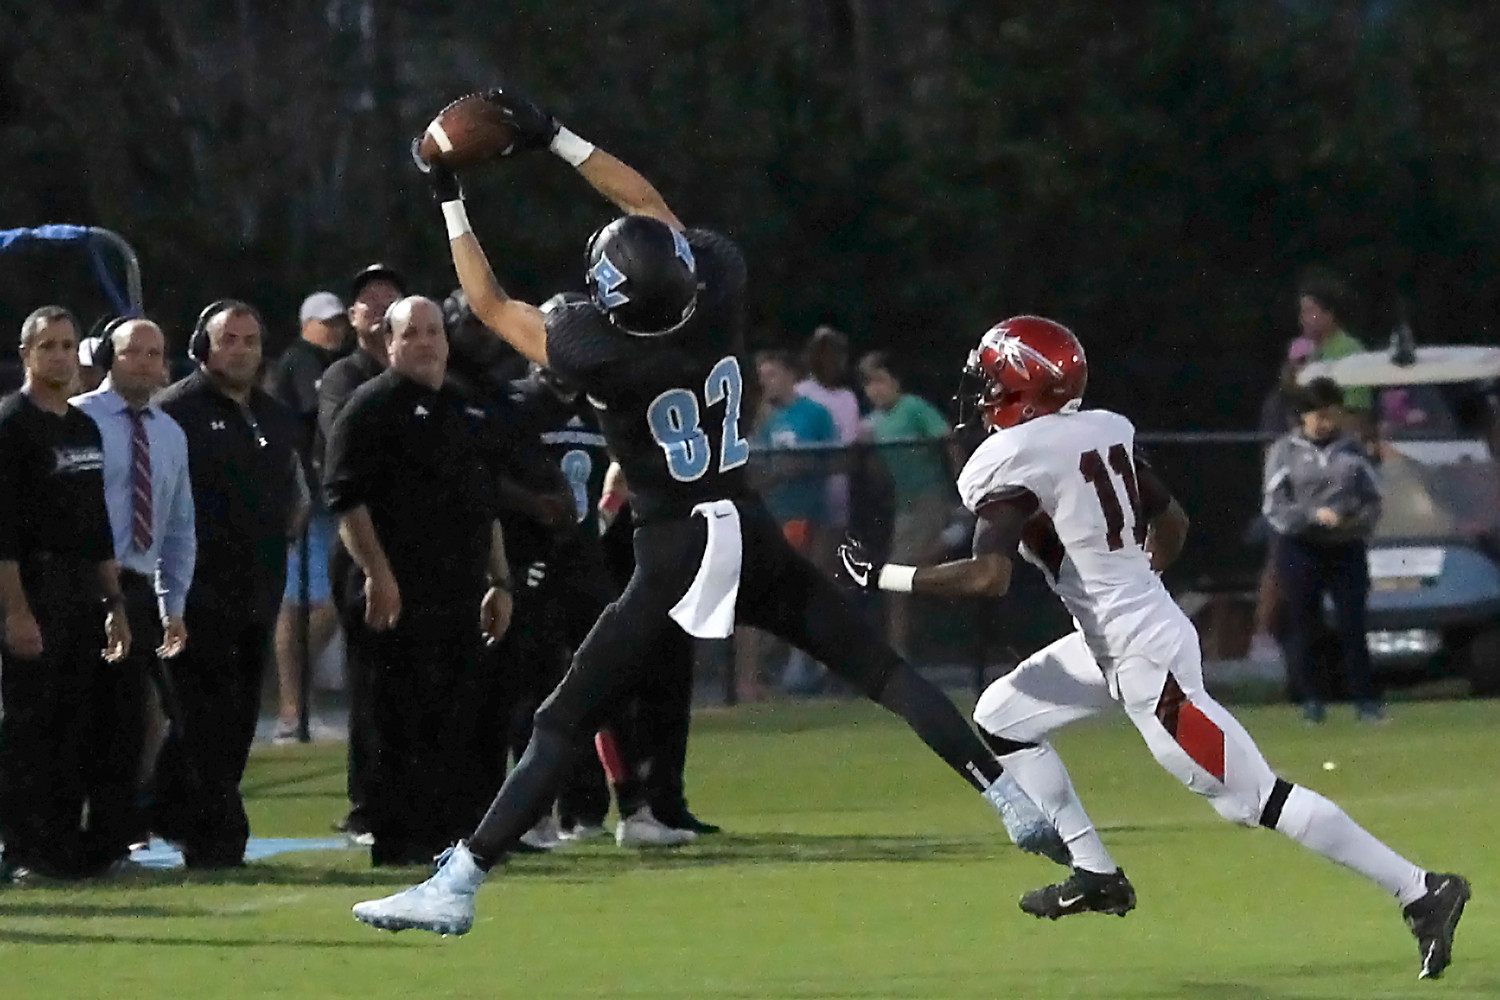 Reese Russi pulls down a pass for the Sharks against Parker.